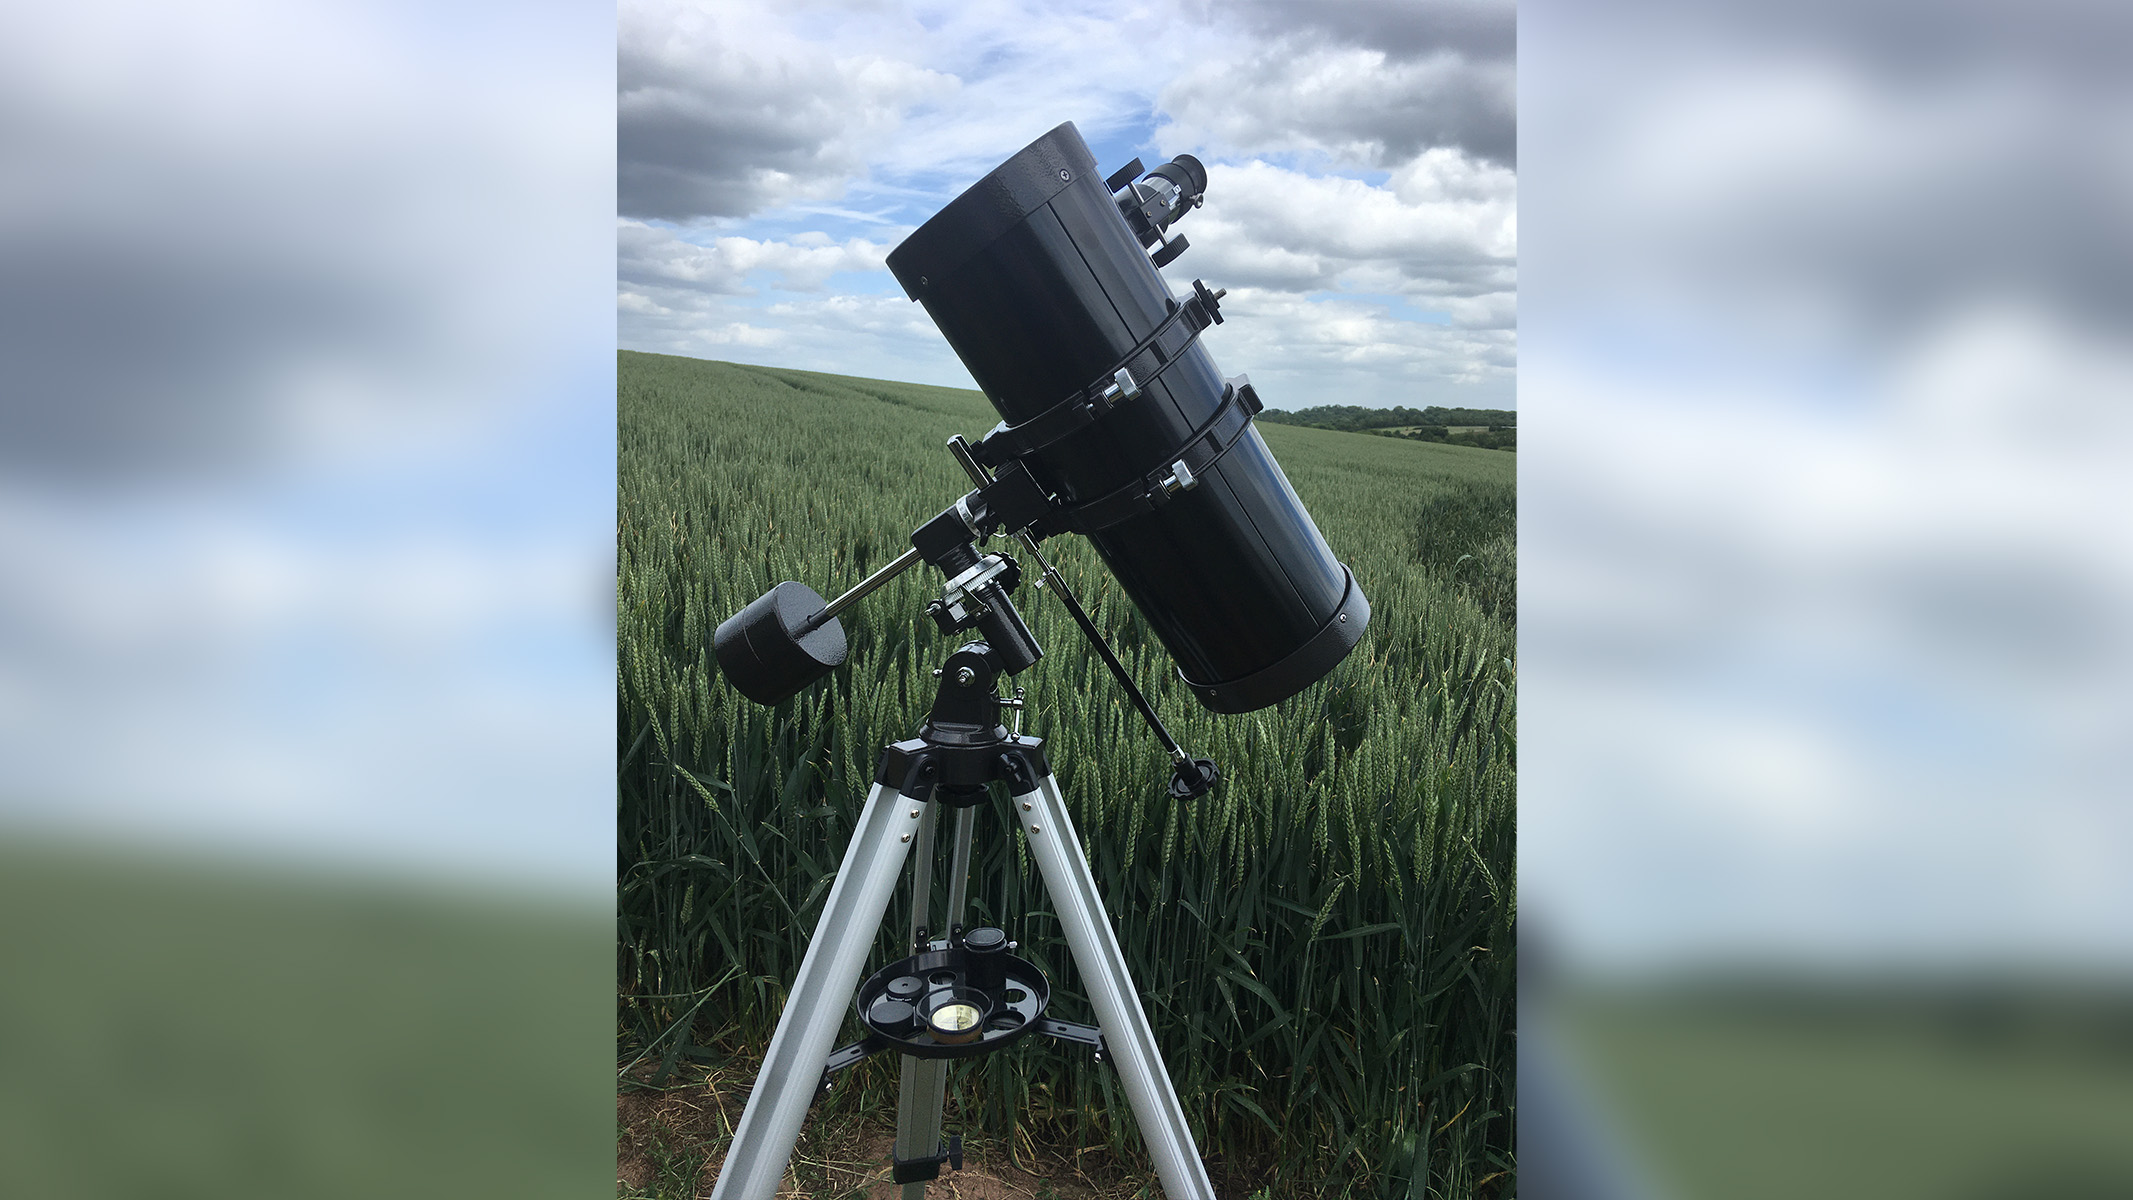 The Celestron Powerseeker 127EQ pointed at the clouds